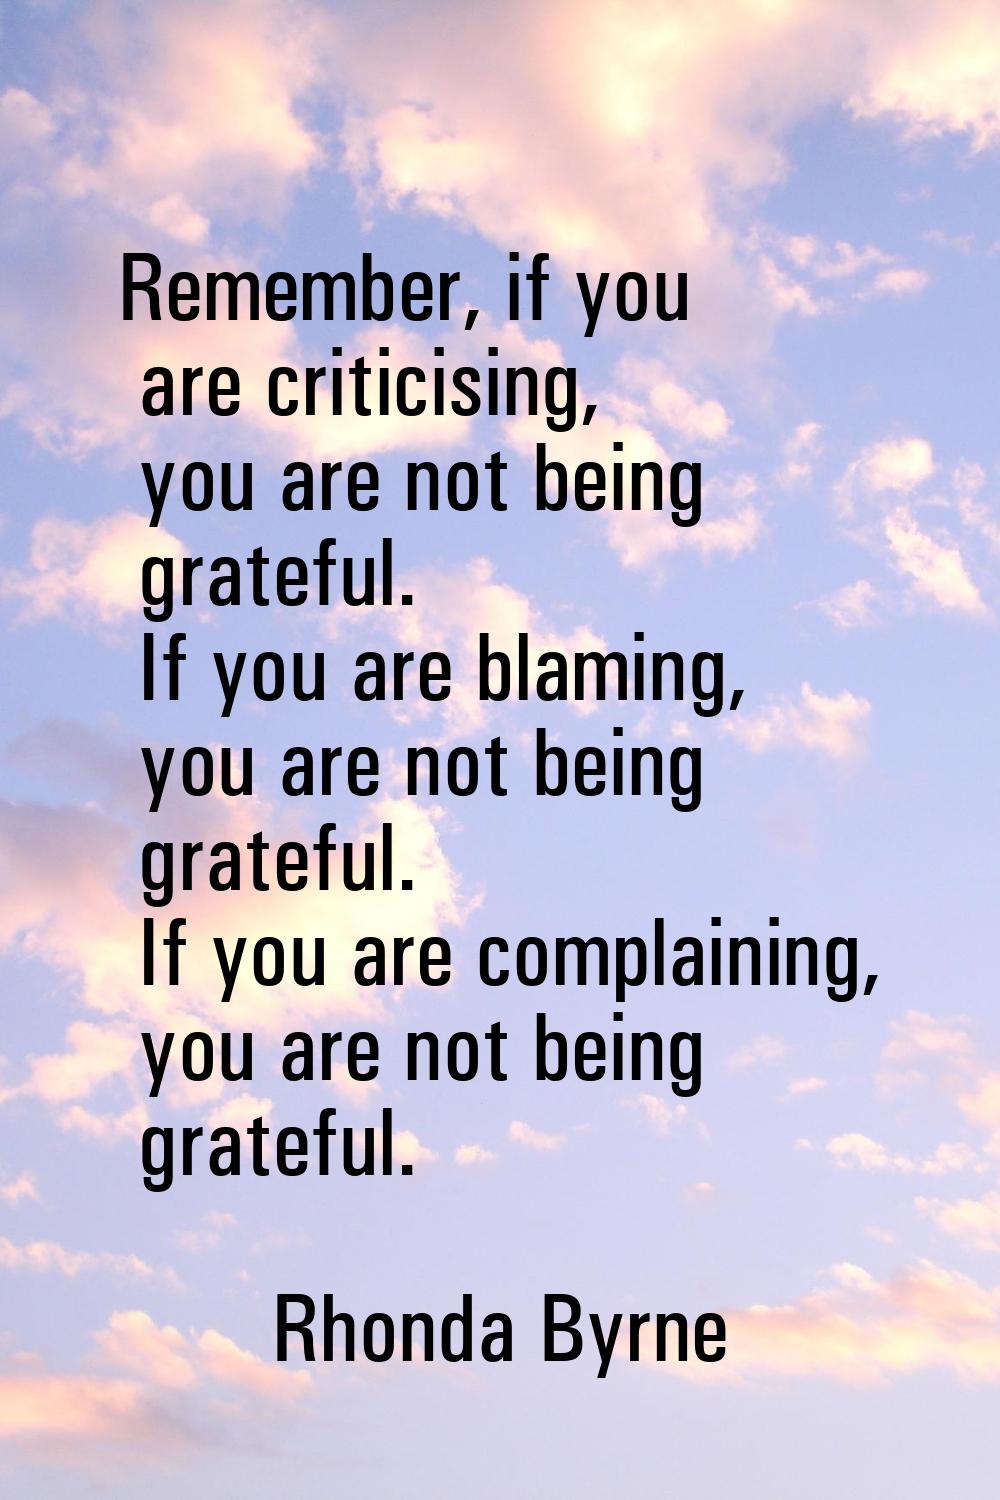 Remember, if you are criticising, you are not being grateful. If you are blaming, you are not being